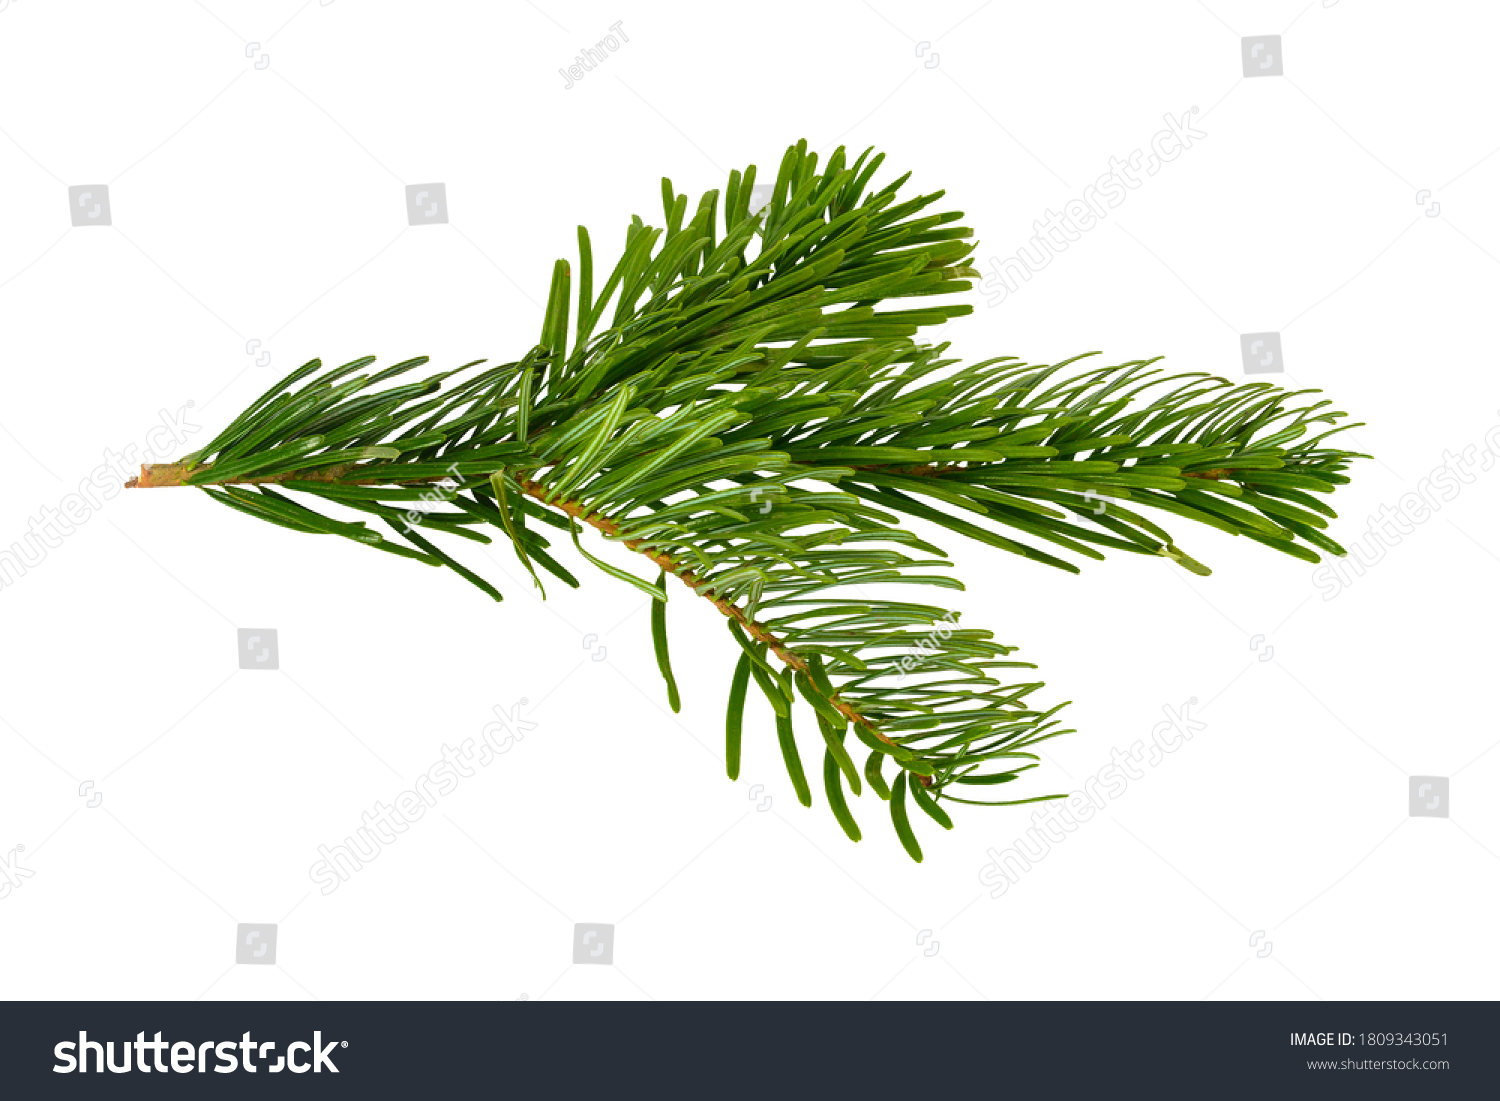 Branch of Nordmann Fir Christmas Tree. Green spruce or pine branch with needles. Isolated on white background. Closeup top view. #1809343051